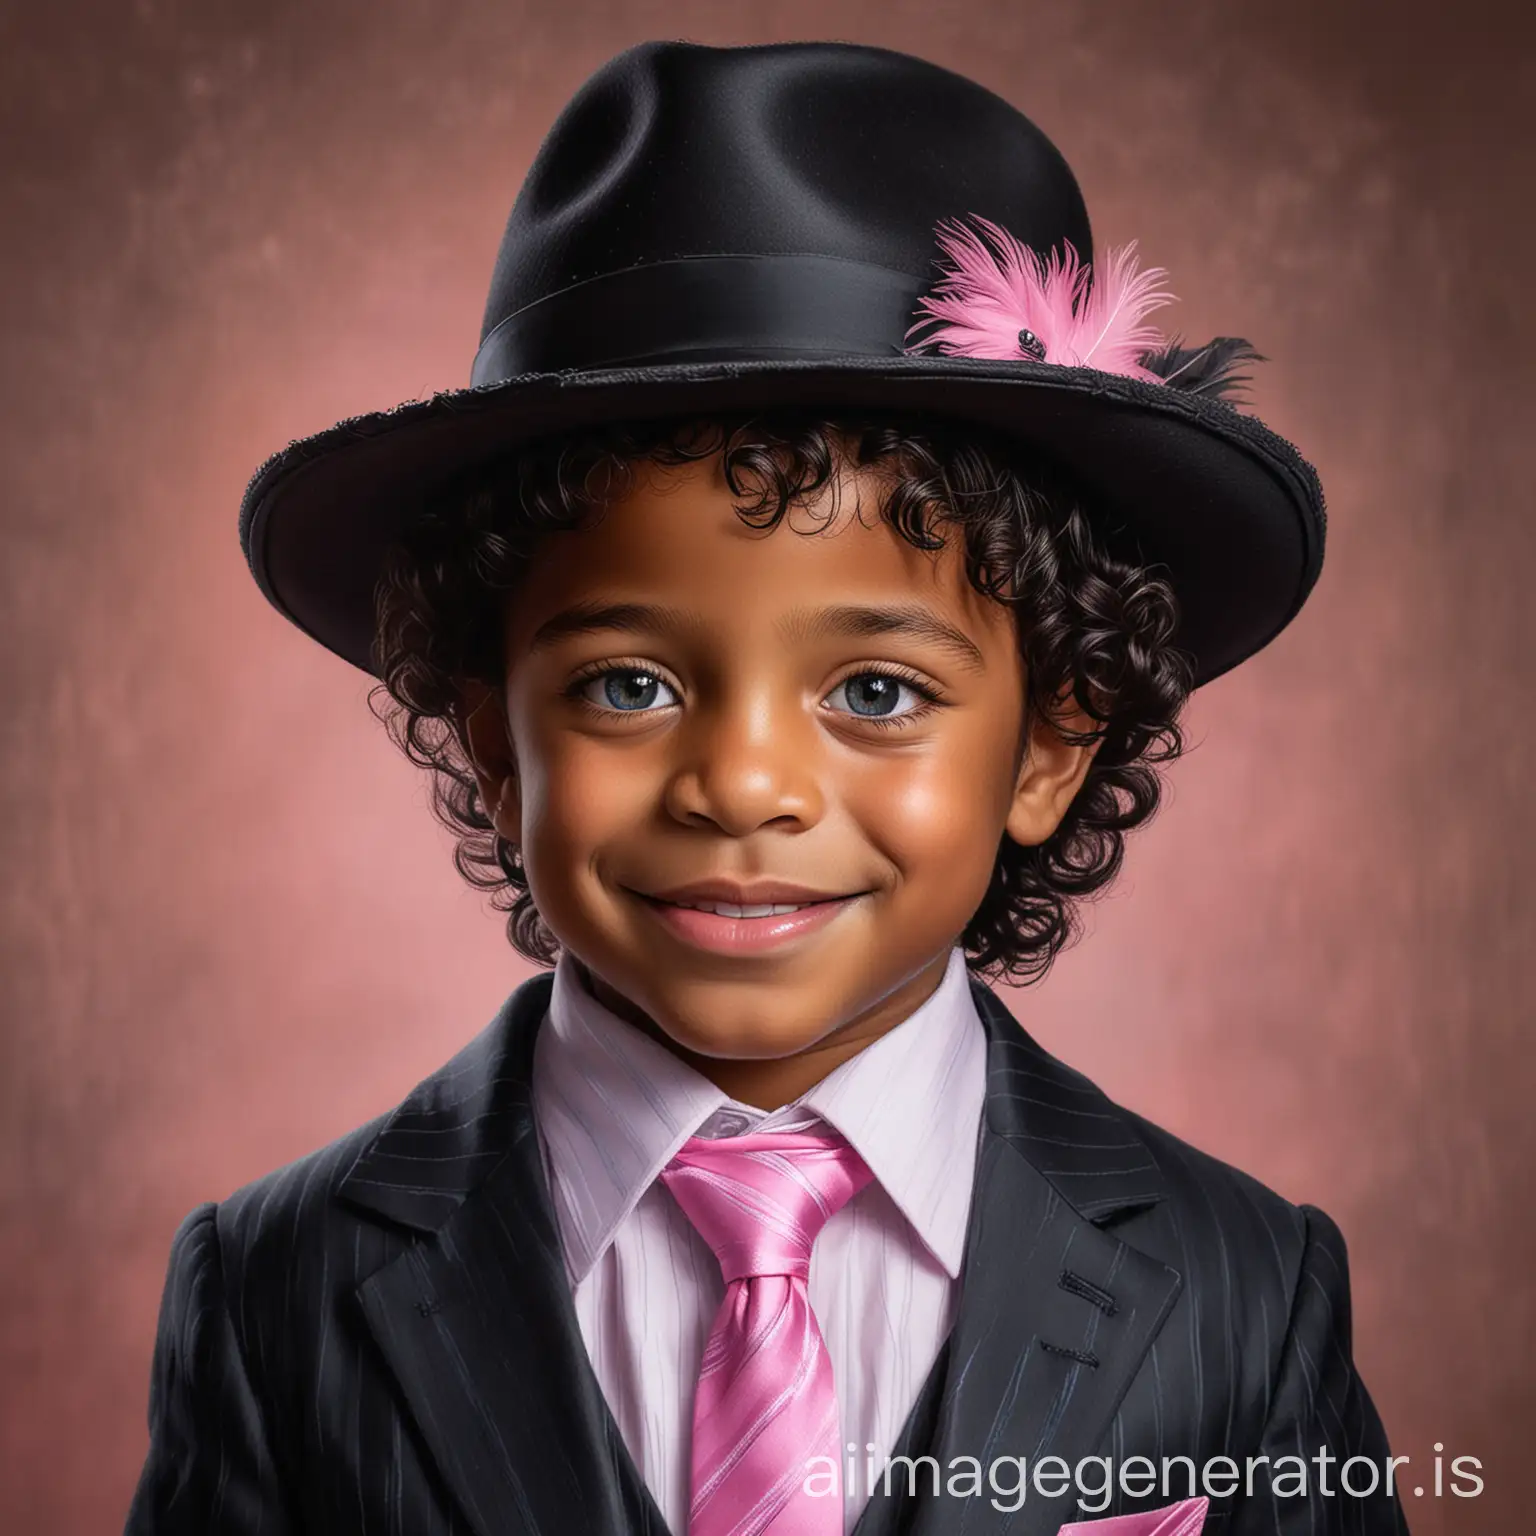 A realistic portrait of a 4 year old black Colombian boy, who is small for his age . He has shoulder length curly hair, black skin and blue eyes. He should be wearing a 3 piece black pinstripe suit, with a pink shirt and a pink fedora with a black and pink feather. And he should be smiling